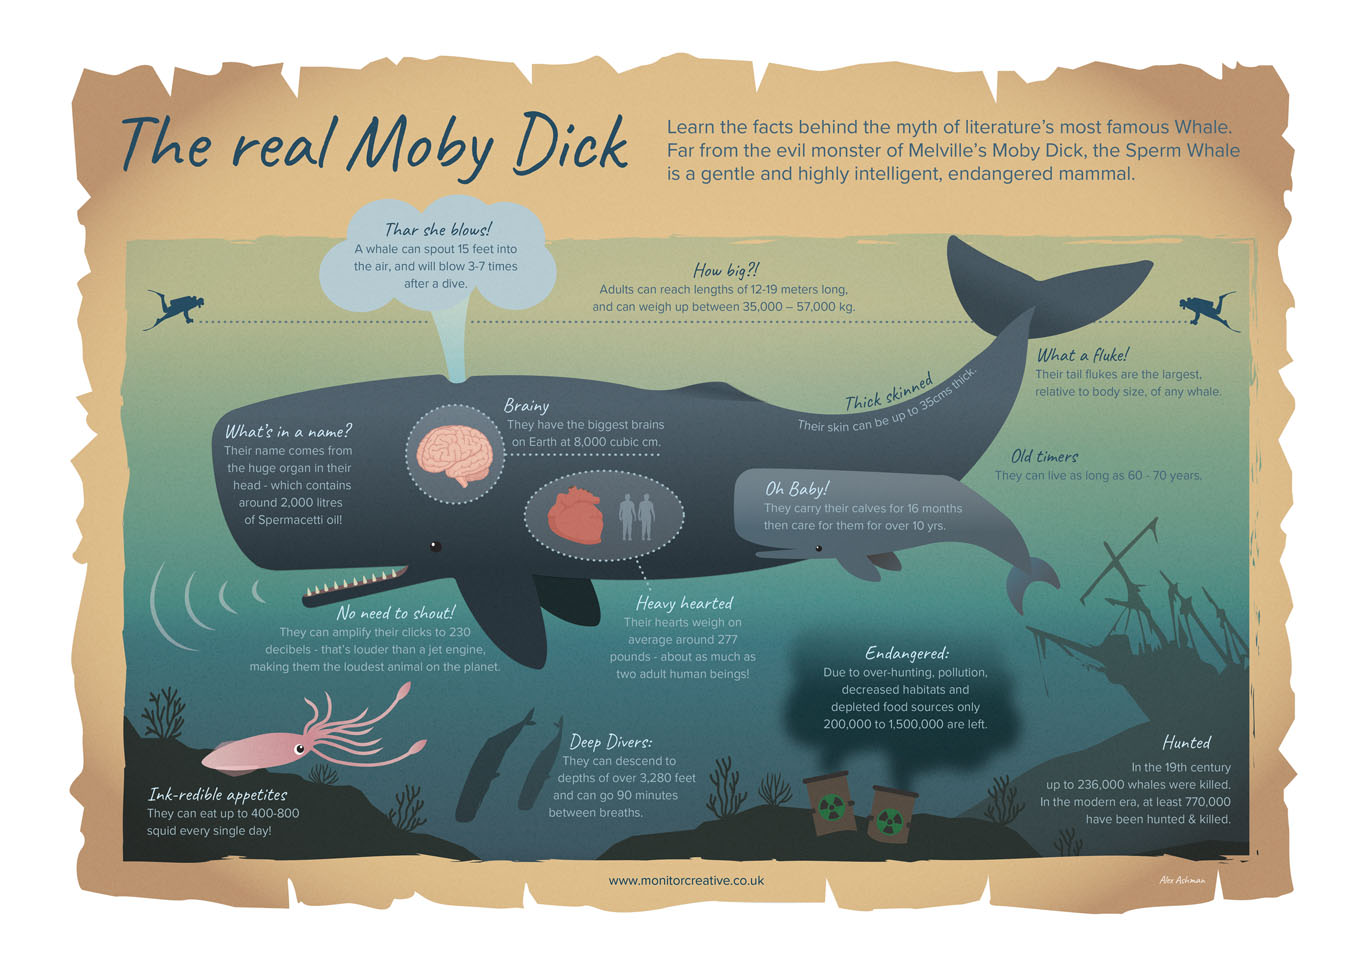 What was the head that is selling in moby dick